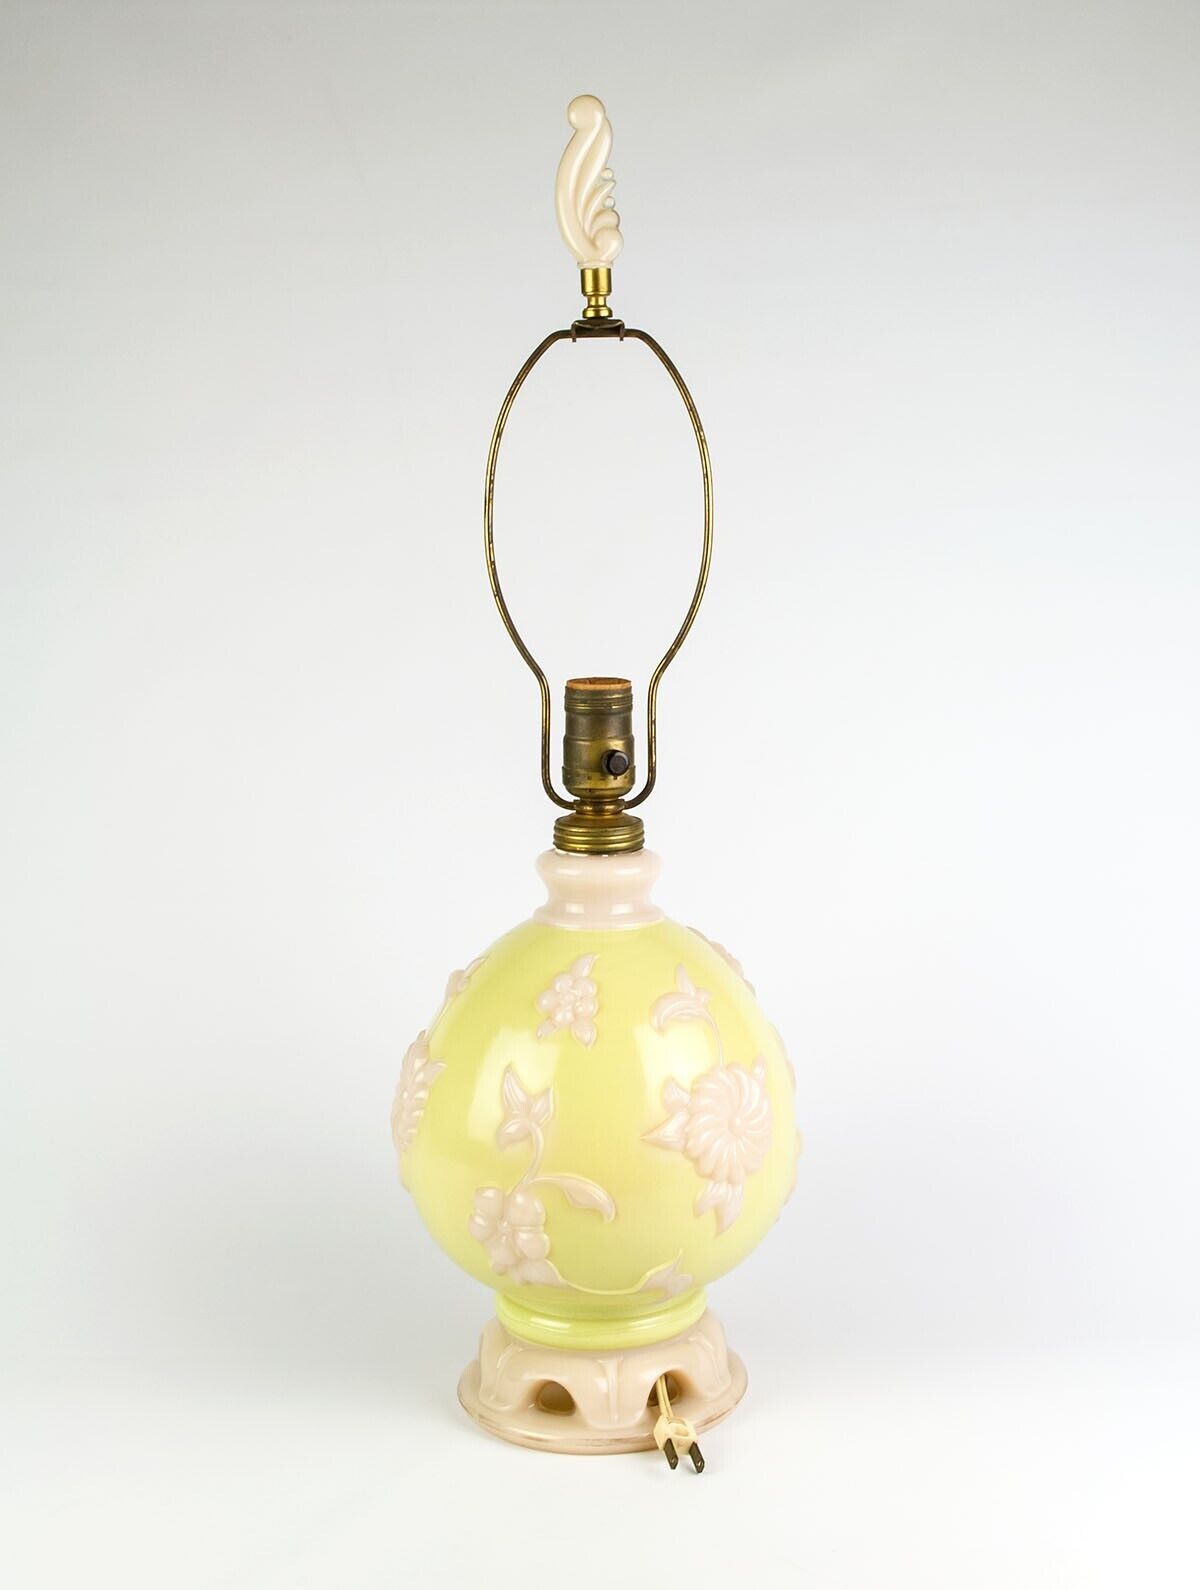 Aladdin Alacite & Chartreuse Yellow G-326 Electric Lamp w Plume Finale, Works - $50.00